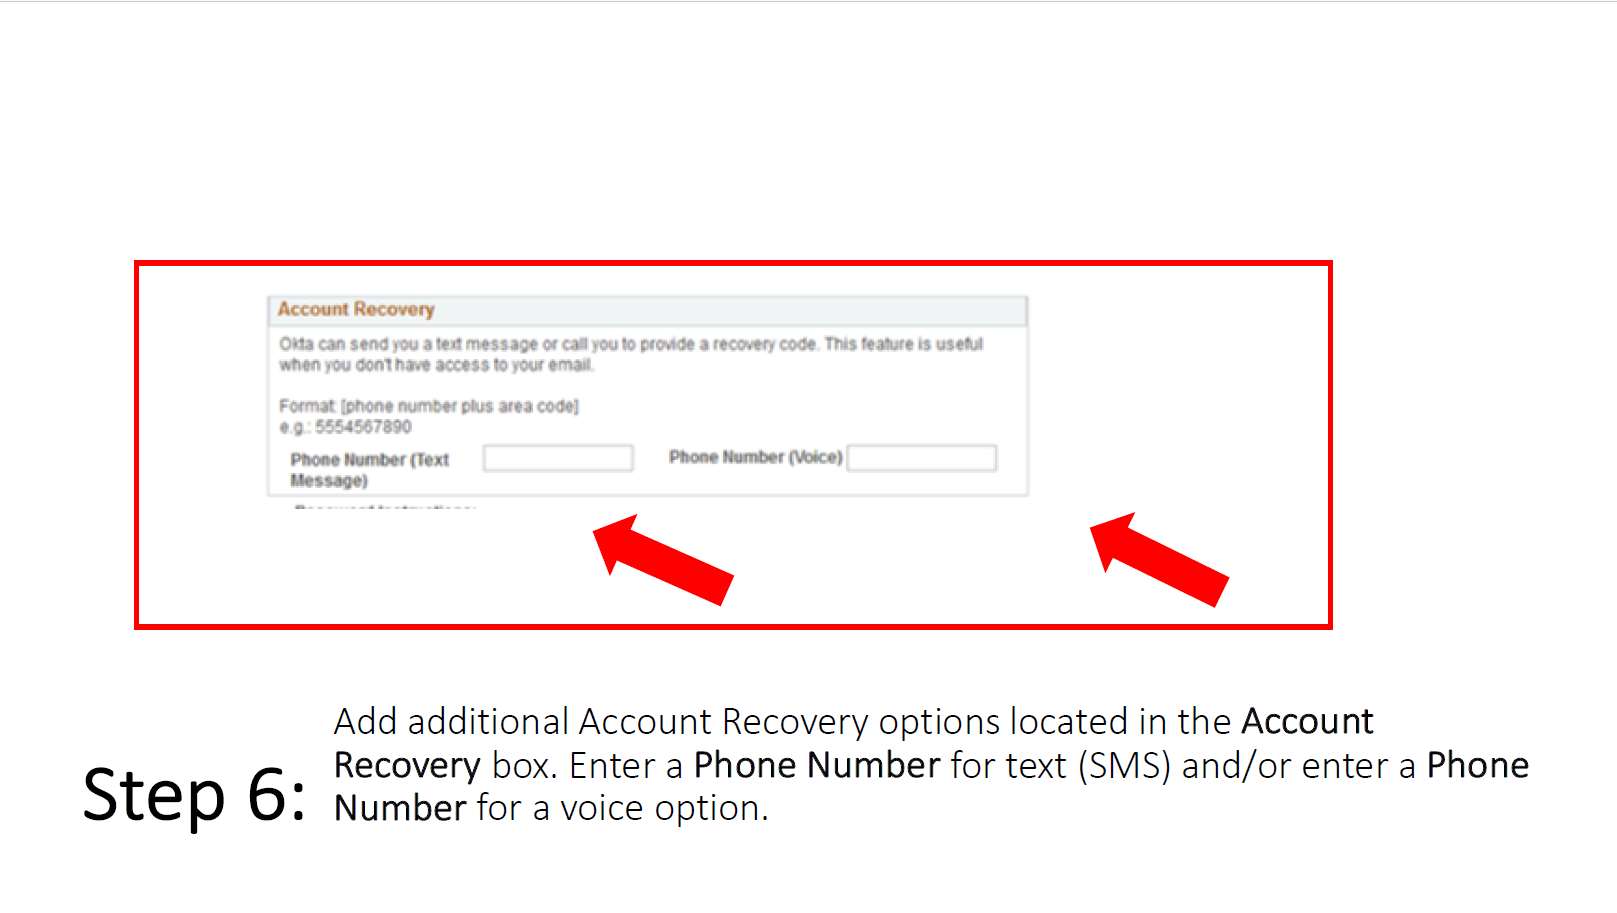 Step 6: Add additional Account Recovery options located in the Account Recovery box. Enter a Phone Number for text (SMS) and/or enter a Phone Number for a voice option. 